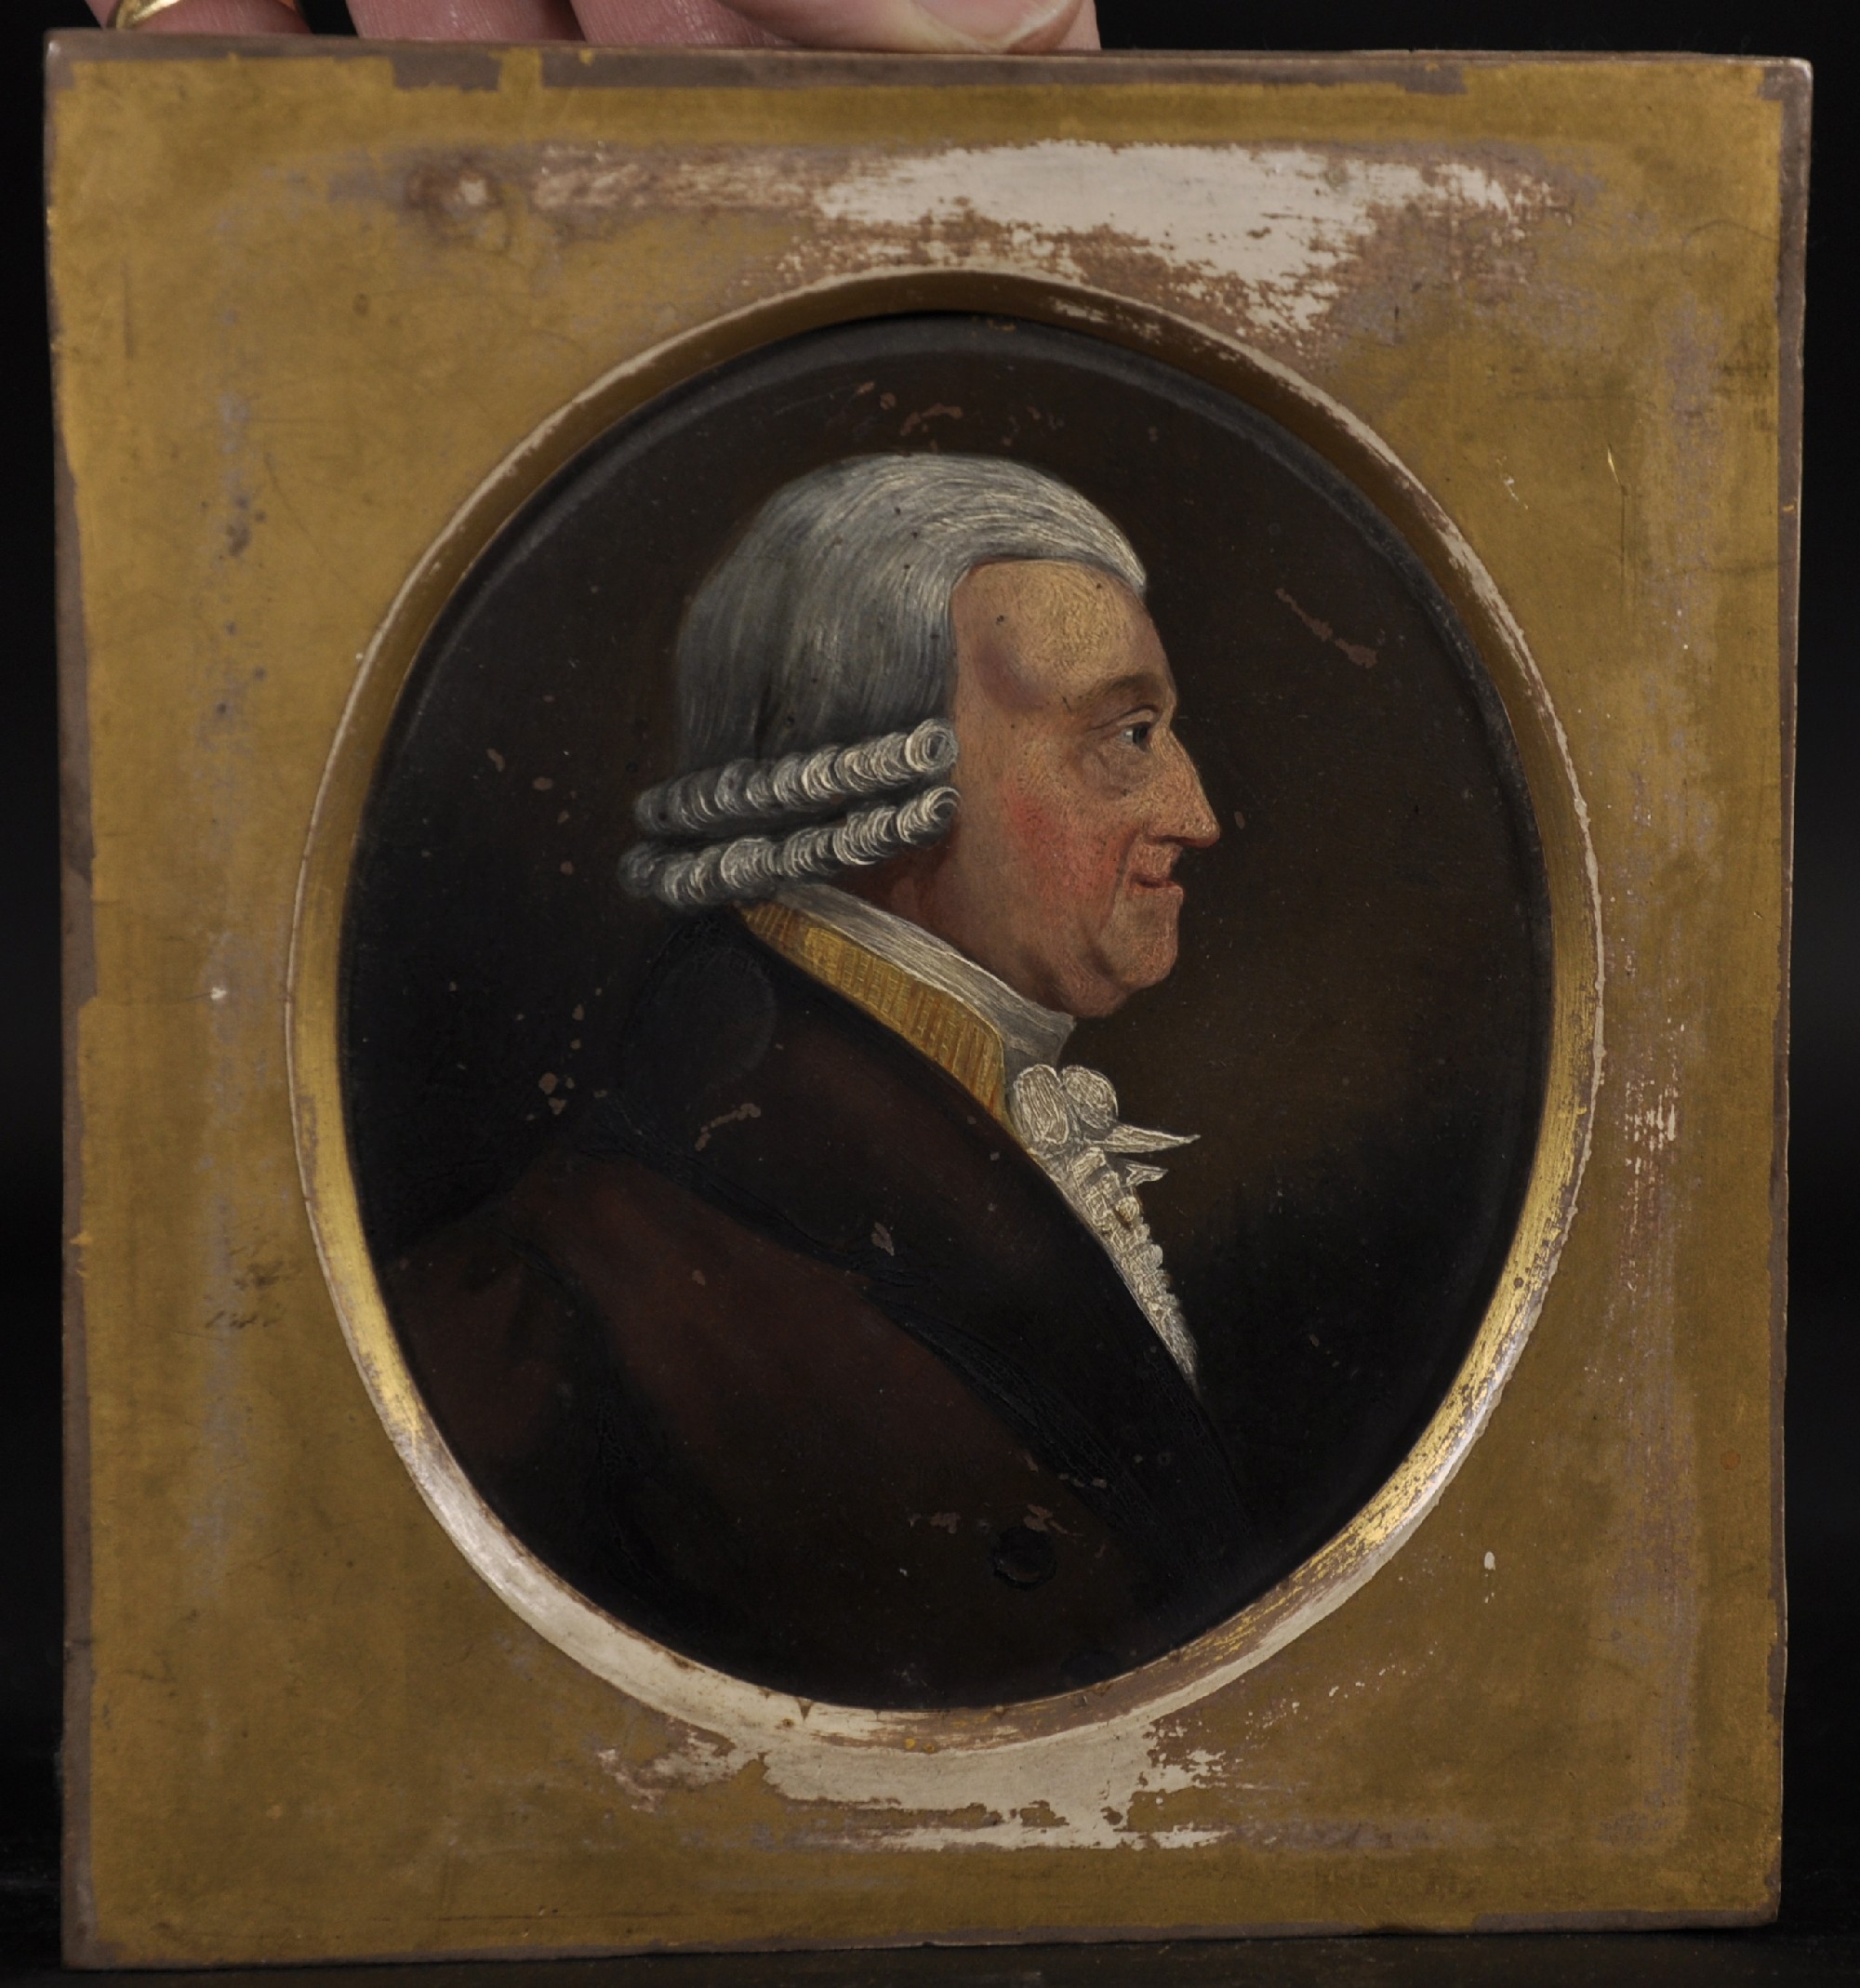 18th Century English School. A Bust Portrait of a Wigged Man, Oil on Copper, Oval, 5.25" x 4.5". - Image 2 of 3